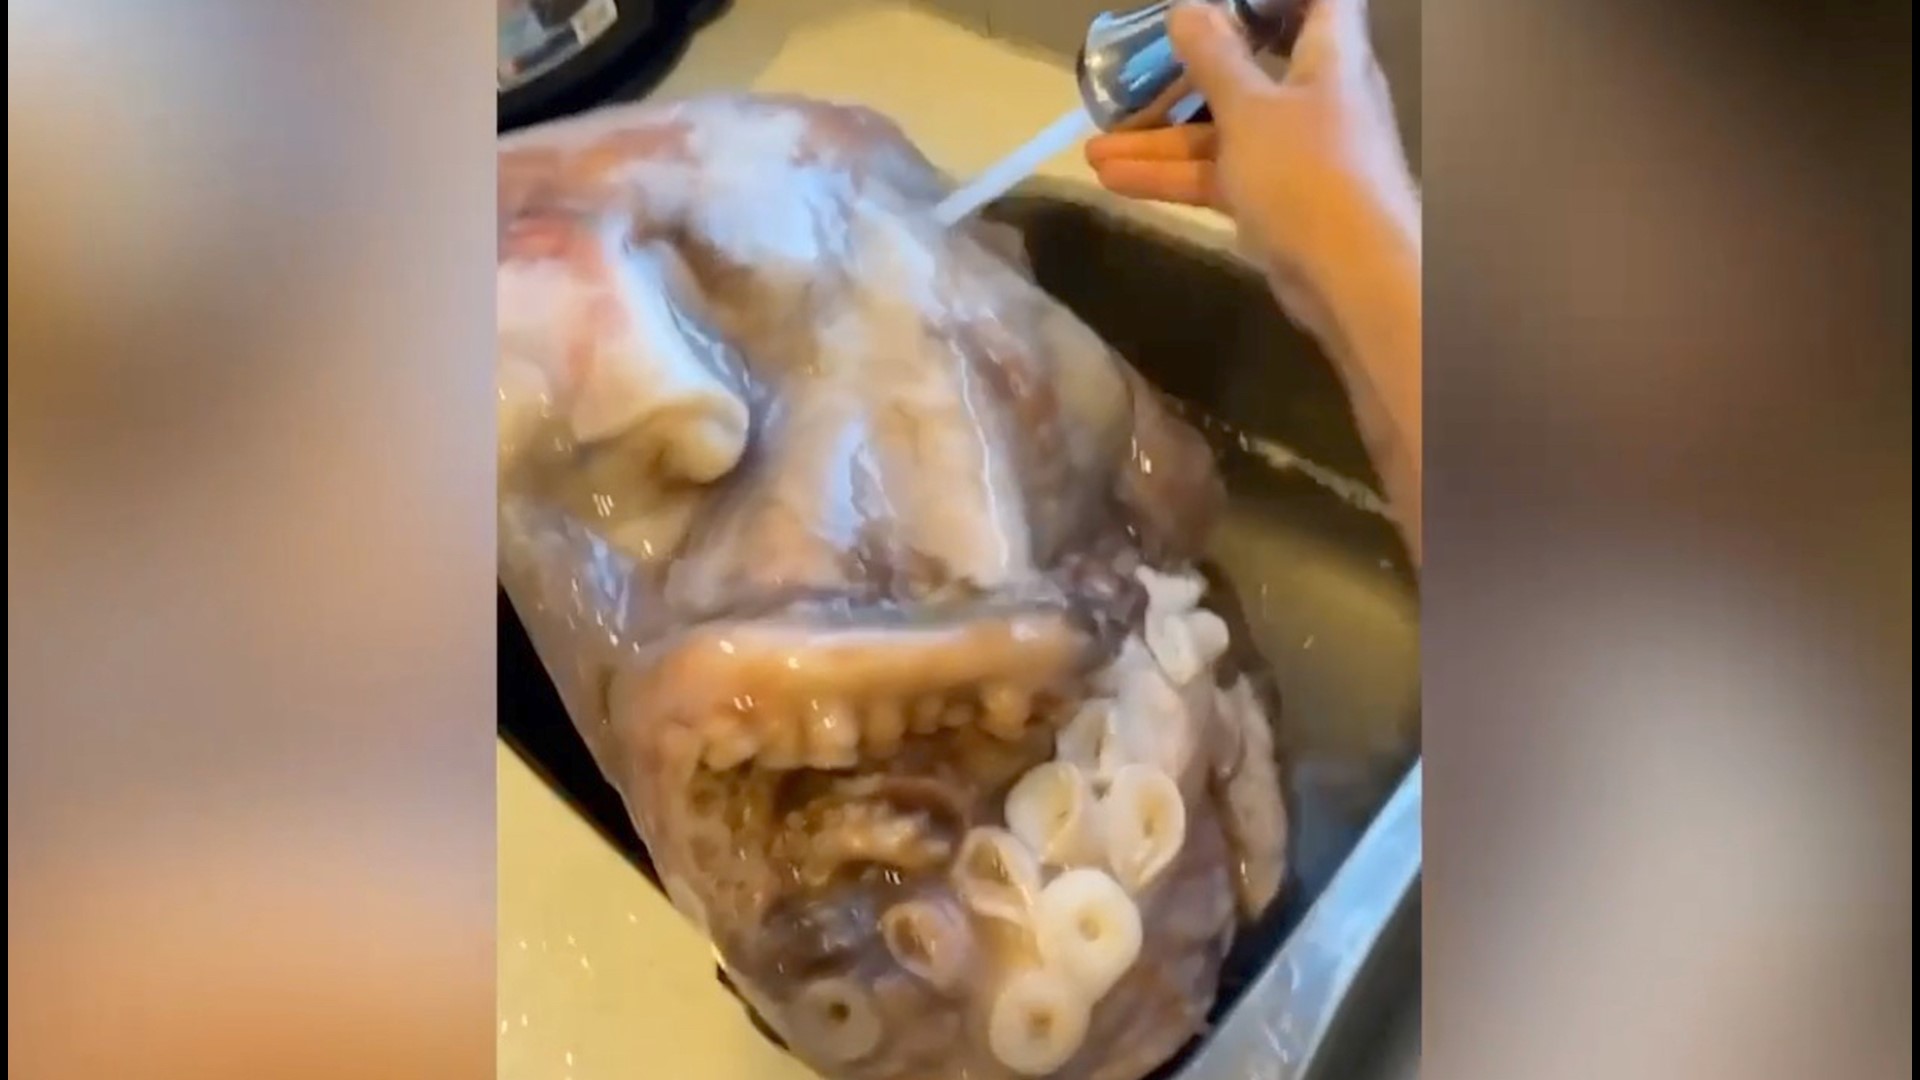 Vincent Dunn bought 40lbs of octopus off of Facebook marketplace, the scene made him a TikTok star. Buzz60's Maria Mercedes Galuppo has the story.